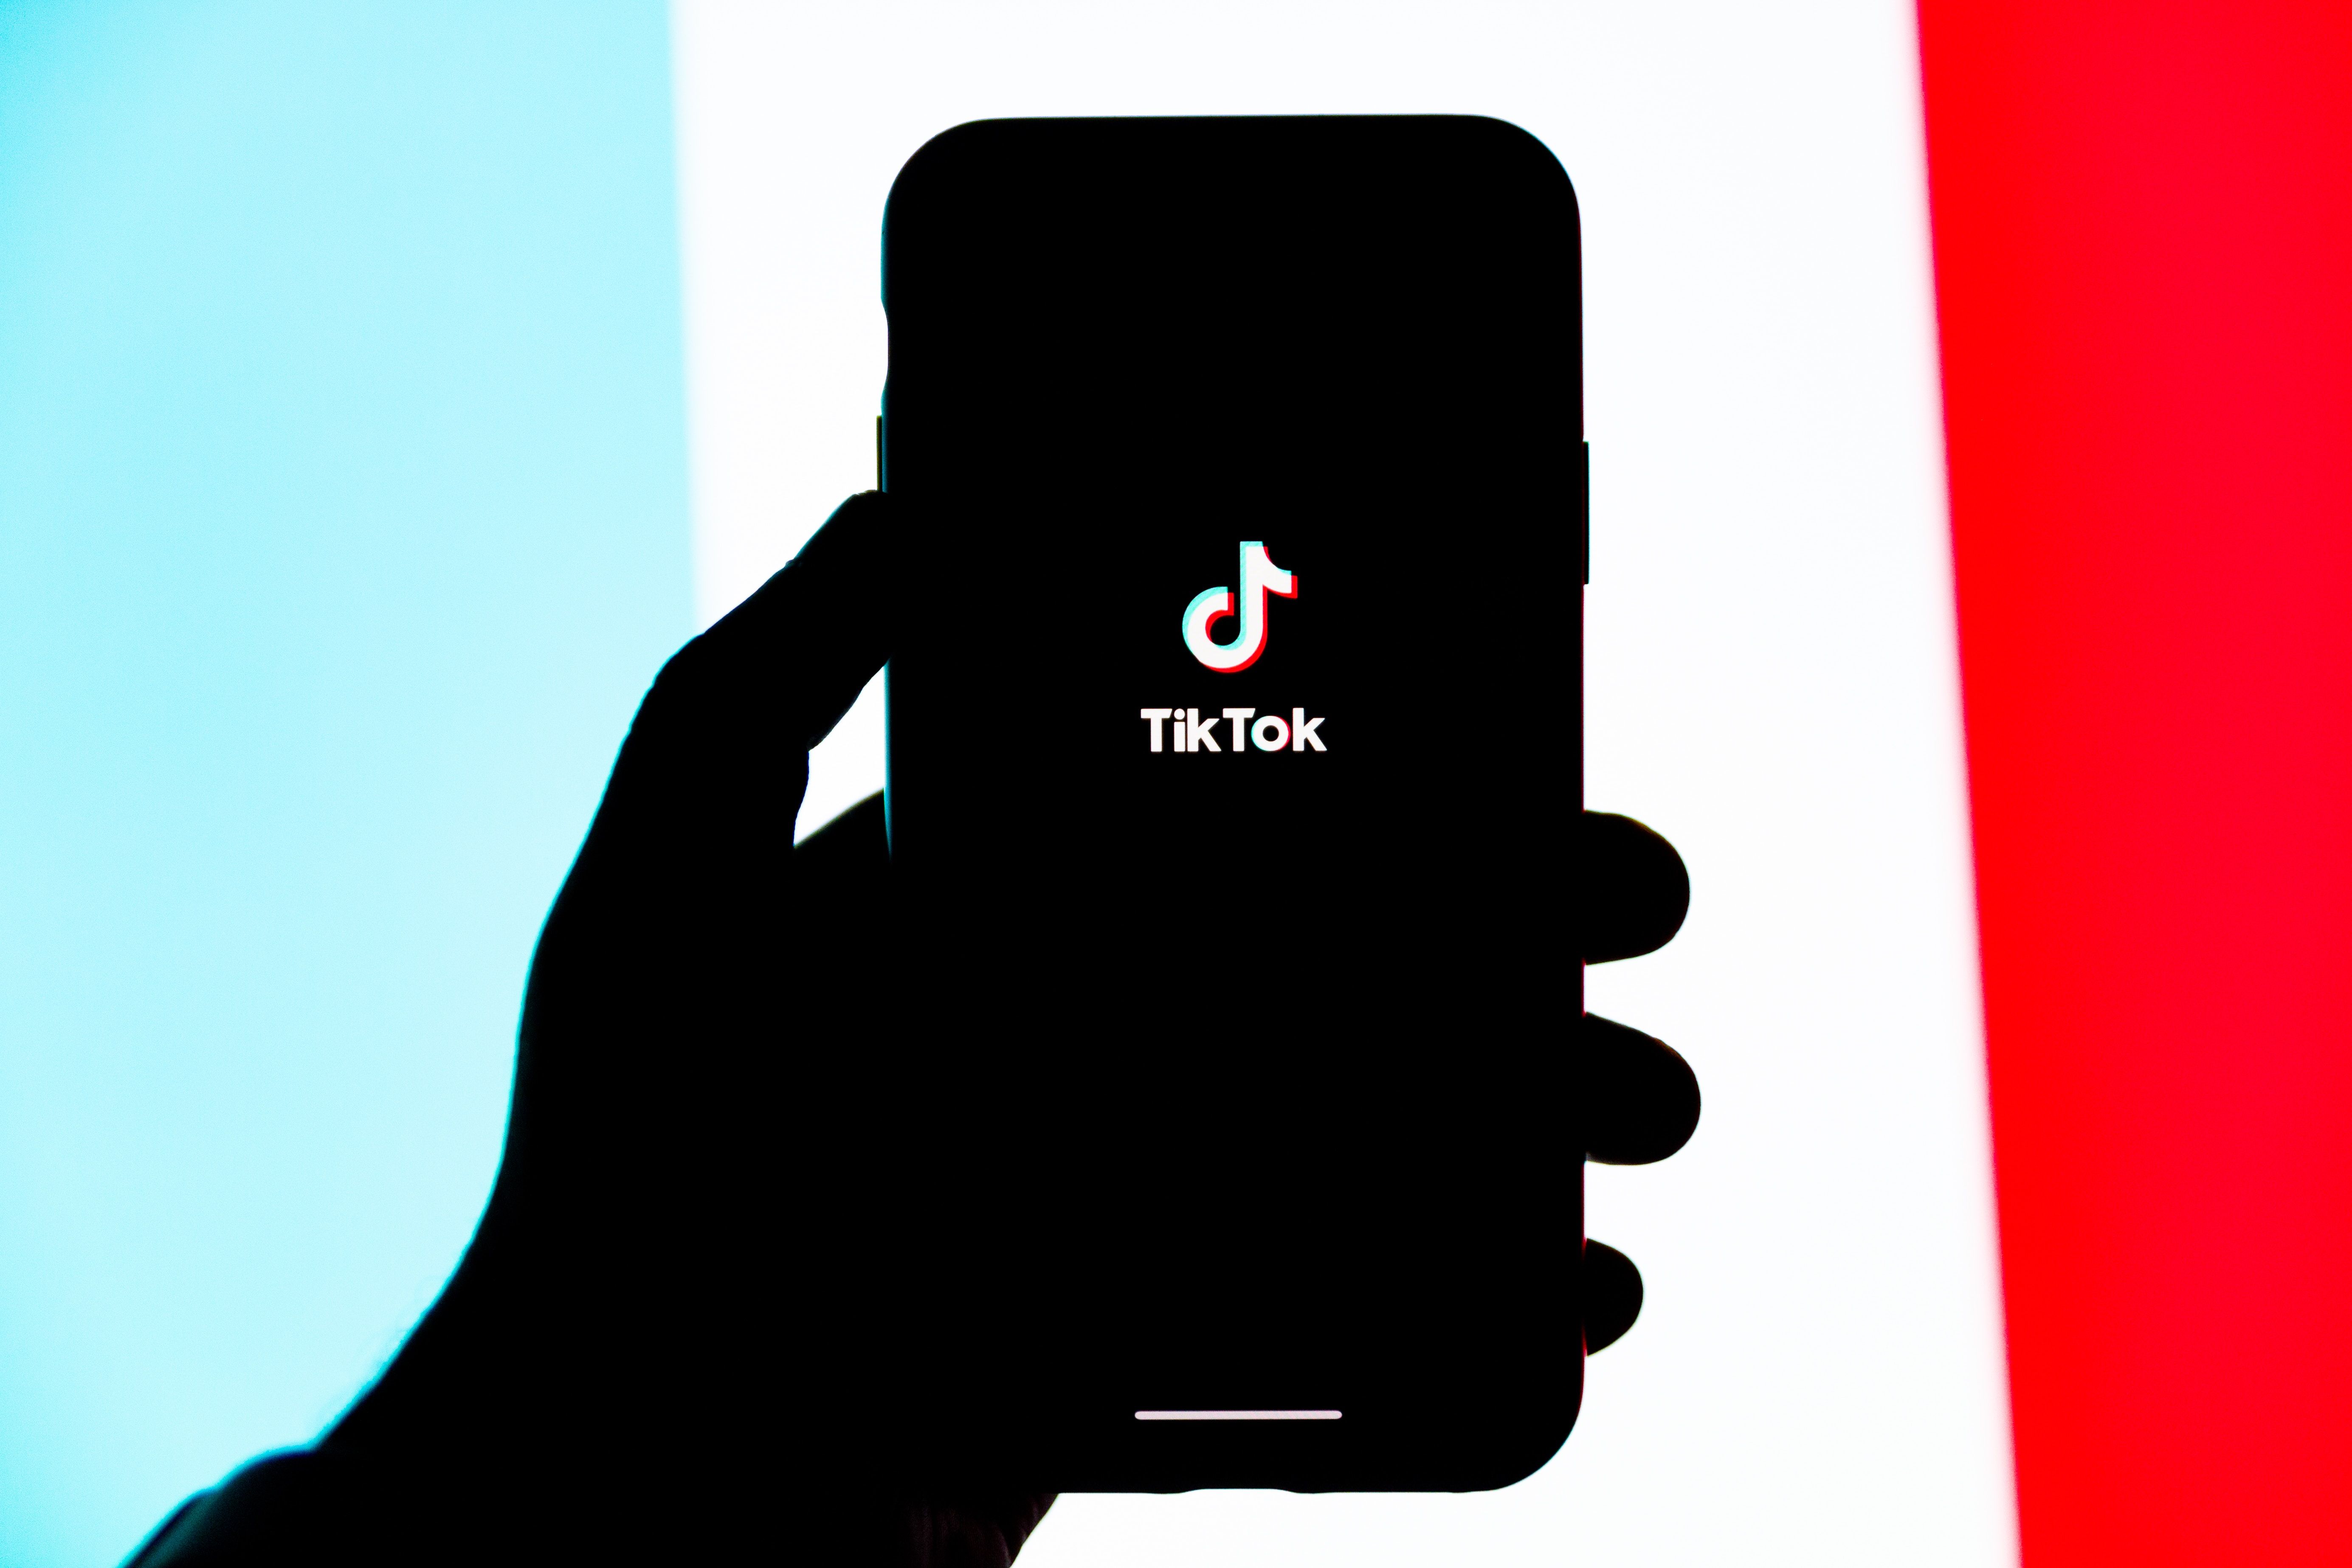 A silhouette of a hand holding a phone displaying the TikTok app logo against a blue, white, and red striped background.